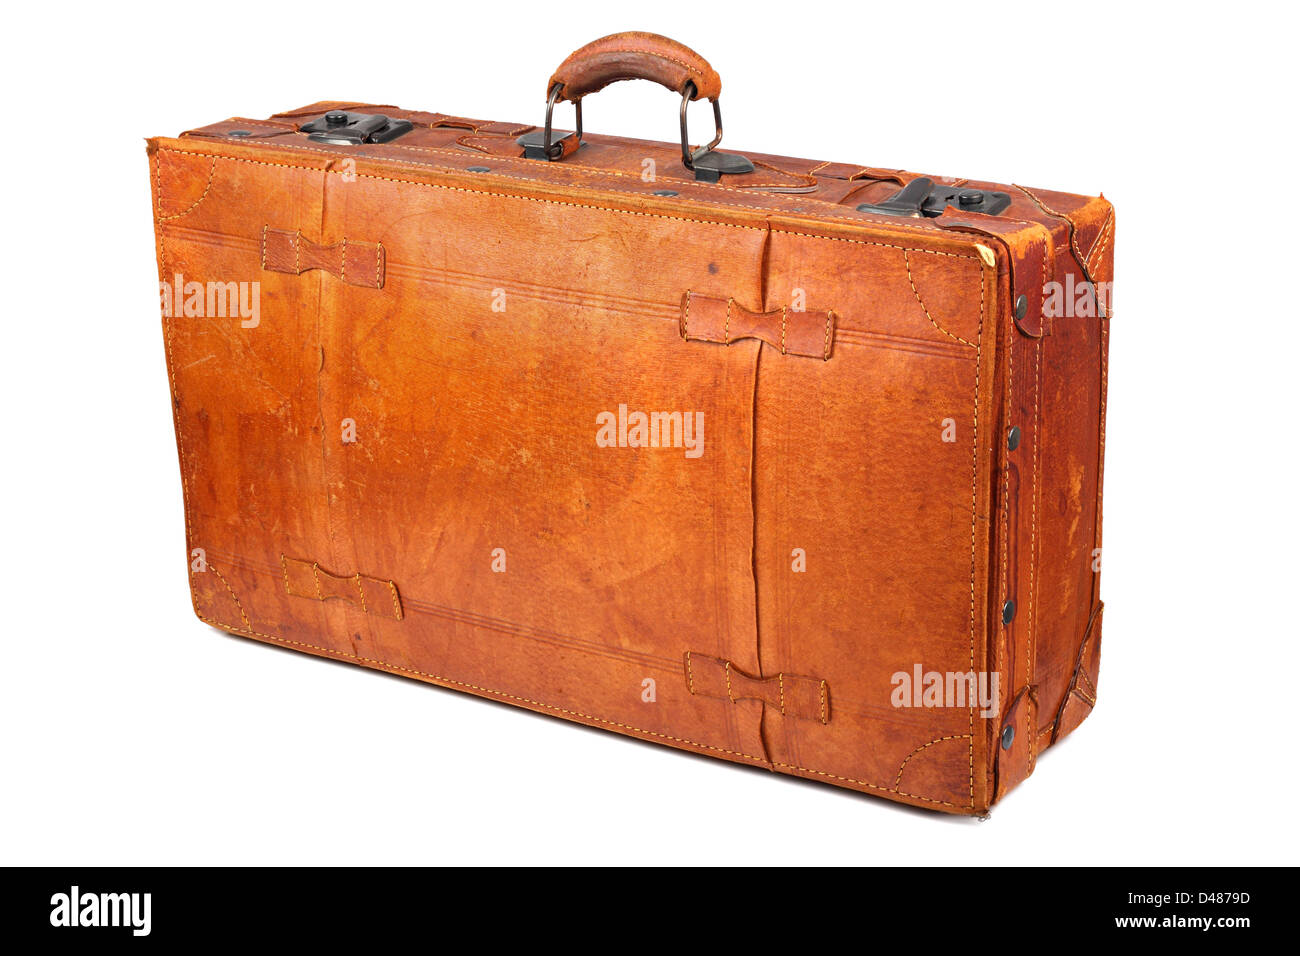 Leather Suitcase Stock Photos, Images and Backgrounds for Free